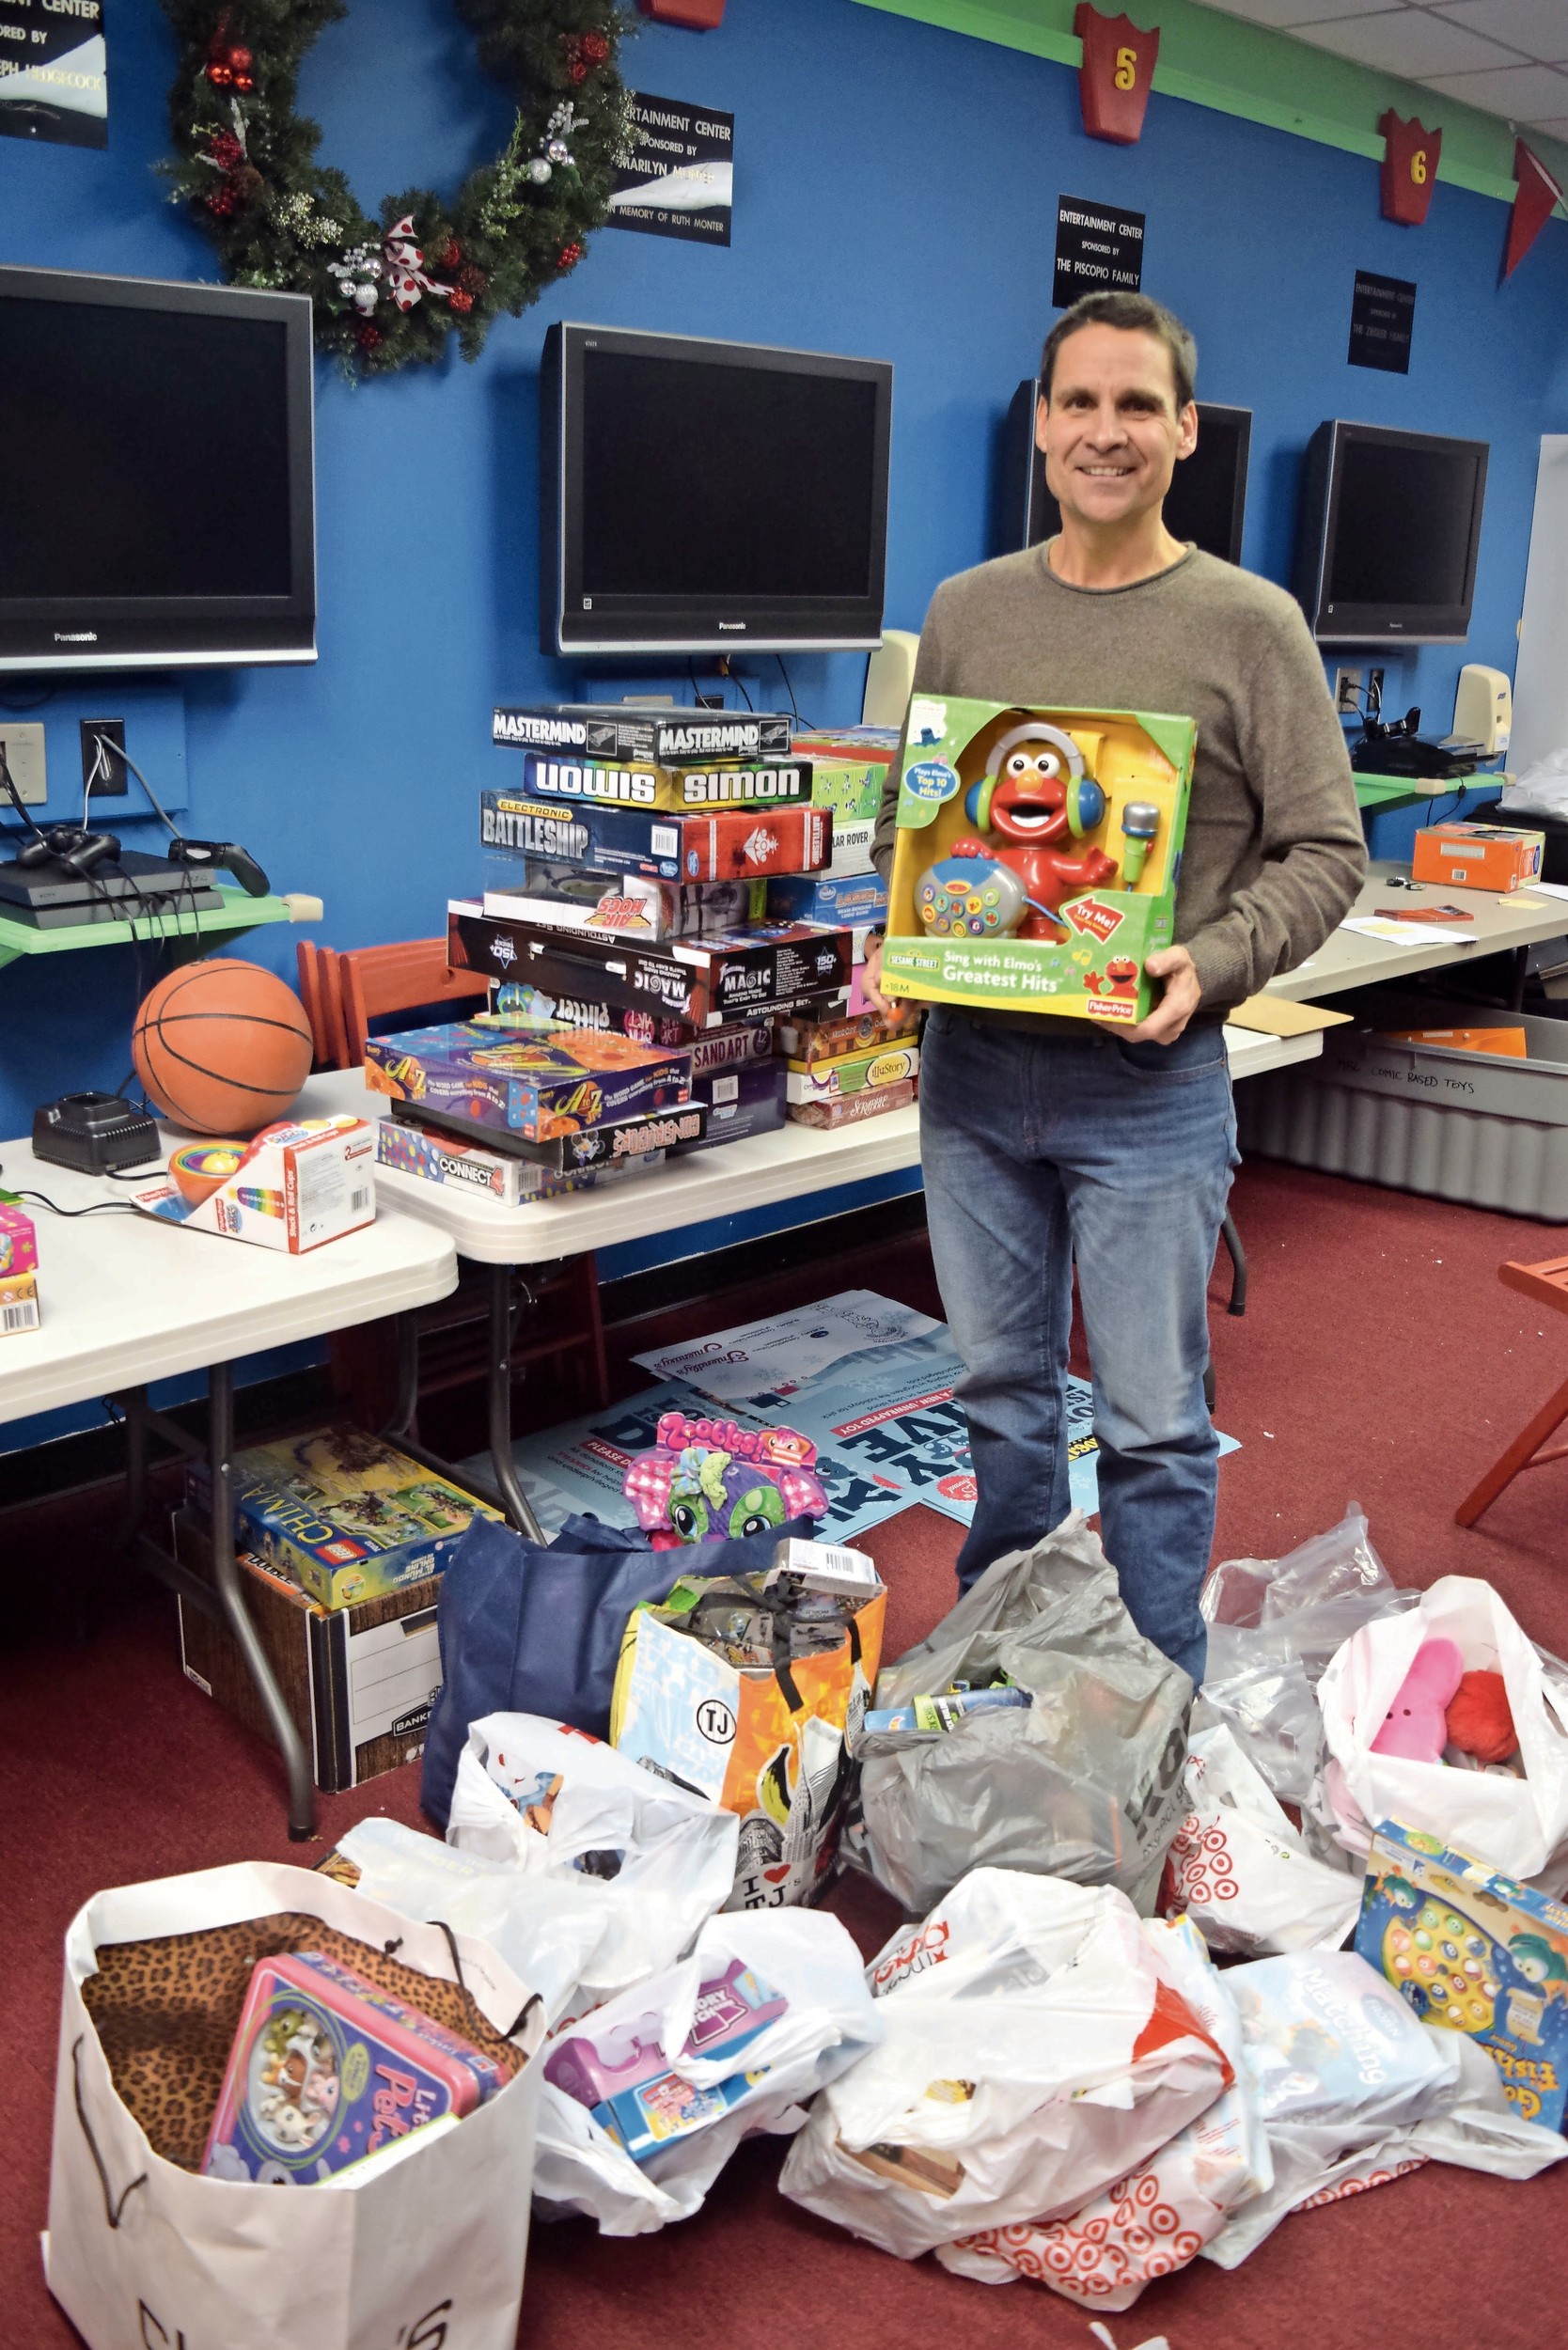 John Theissen said that the Wantagh center serves as home base for his charity’s annual back-to-school supply and holiday toy drives.